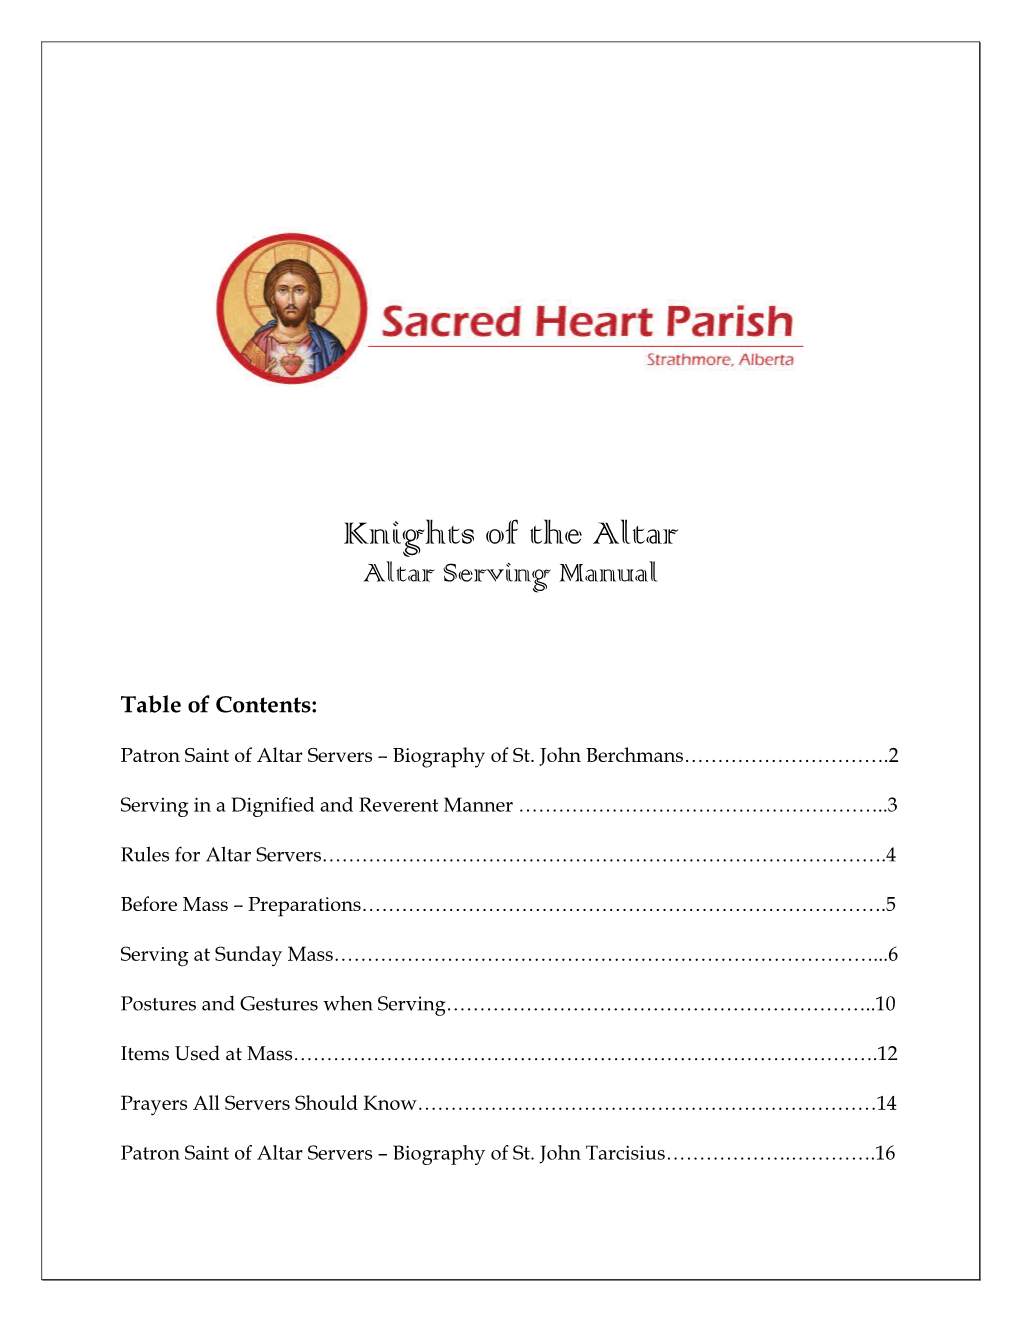 Knights of the Altar Altar Serving Manual